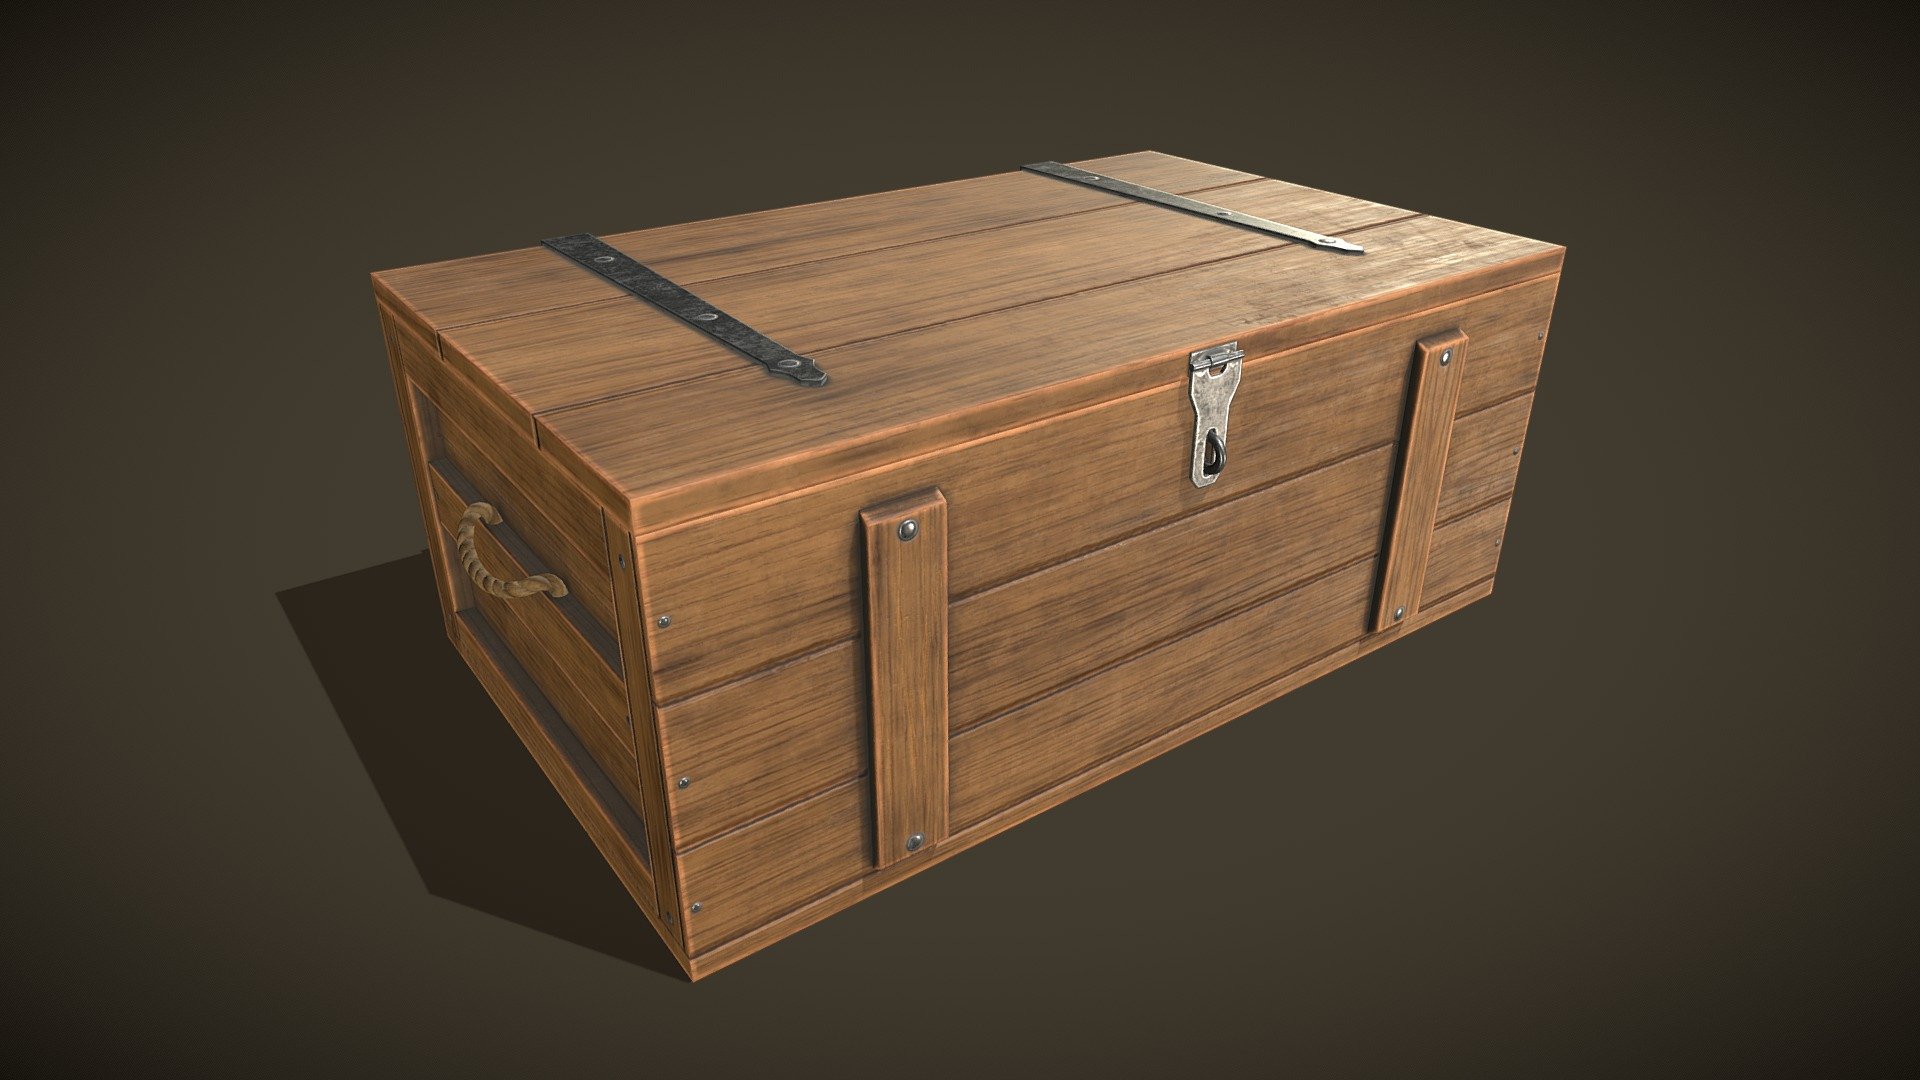 Medieval Wooden Chest VI with PBR Textures and animations (Open/Close). Ideal to loot itens or treasures. Ready to use in any project.

Are you liked this model? Feel free to take a look on my another models! Here

Features:

.Fbx, .Obj, .Uasset and .Blend files.

Animated.

Rigged.

Low Poly Mesh game-ready.

Real-World Scale (centimeters).

Unreal Project: 4.15+

Custom Collision for Unreal Engine 4 (Handmade).

Tris Count: 1,976.

Number of Textures:5

Number of Textures (UE4): 3

PBR Textures (4096x4096) (PNG).

Type of Textures: Base Color, Roughness, Metallic, Normal Map and Ambient Occlusion (PNG)

Combined RMA texture (Roughness, Metallic and Ambient Occlusion) for Unreal Engine (PNG) 3d model